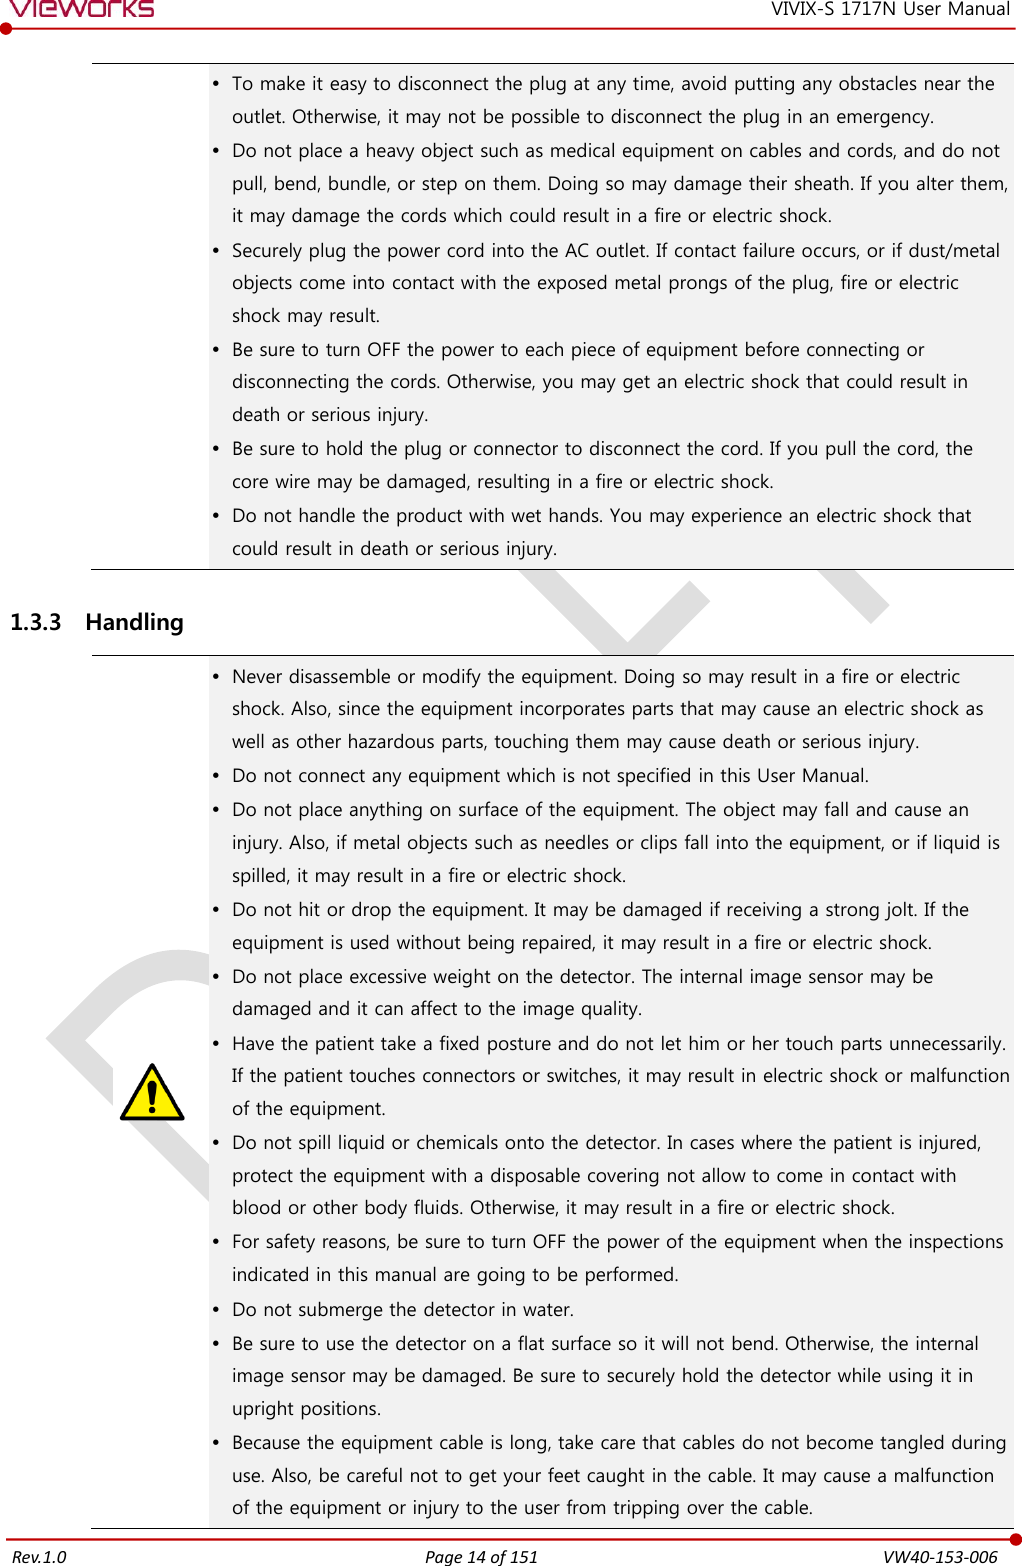   Rev.1.0 Page 14 of 151  VW40-153-006 VIVIX-S 1717N User Manual  To make it easy to disconnect the plug at any time, avoid putting any obstacles near the outlet. Otherwise, it may not be possible to disconnect the plug in an emergency.  Do not place a heavy object such as medical equipment on cables and cords, and do not pull, bend, bundle, or step on them. Doing so may damage their sheath. If you alter them, it may damage the cords which could result in a fire or electric shock.  Securely plug the power cord into the AC outlet. If contact failure occurs, or if dust/metal objects come into contact with the exposed metal prongs of the plug, fire or electric shock may result.  Be sure to turn OFF the power to each piece of equipment before connecting or disconnecting the cords. Otherwise, you may get an electric shock that could result in death or serious injury.  Be sure to hold the plug or connector to disconnect the cord. If you pull the cord, the core wire may be damaged, resulting in a fire or electric shock.  Do not handle the product with wet hands. You may experience an electric shock that could result in death or serious injury. 1.3.3 Handling   Never disassemble or modify the equipment. Doing so may result in a fire or electric shock. Also, since the equipment incorporates parts that may cause an electric shock as well as other hazardous parts, touching them may cause death or serious injury.  Do not connect any equipment which is not specified in this User Manual.  Do not place anything on surface of the equipment. The object may fall and cause an injury. Also, if metal objects such as needles or clips fall into the equipment, or if liquid is spilled, it may result in a fire or electric shock.  Do not hit or drop the equipment. It may be damaged if receiving a strong jolt. If the equipment is used without being repaired, it may result in a fire or electric shock.  Do not place excessive weight on the detector. The internal image sensor may be damaged and it can affect to the image quality.  Have the patient take a fixed posture and do not let him or her touch parts unnecessarily. If the patient touches connectors or switches, it may result in electric shock or malfunction of the equipment.  Do not spill liquid or chemicals onto the detector. In cases where the patient is injured, protect the equipment with a disposable covering not allow to come in contact with blood or other body fluids. Otherwise, it may result in a fire or electric shock.  For safety reasons, be sure to turn OFF the power of the equipment when the inspections indicated in this manual are going to be performed.  Do not submerge the detector in water.  Be sure to use the detector on a flat surface so it will not bend. Otherwise, the internal image sensor may be damaged. Be sure to securely hold the detector while using it in upright positions.  Because the equipment cable is long, take care that cables do not become tangled during use. Also, be careful not to get your feet caught in the cable. It may cause a malfunction of the equipment or injury to the user from tripping over the cable. 